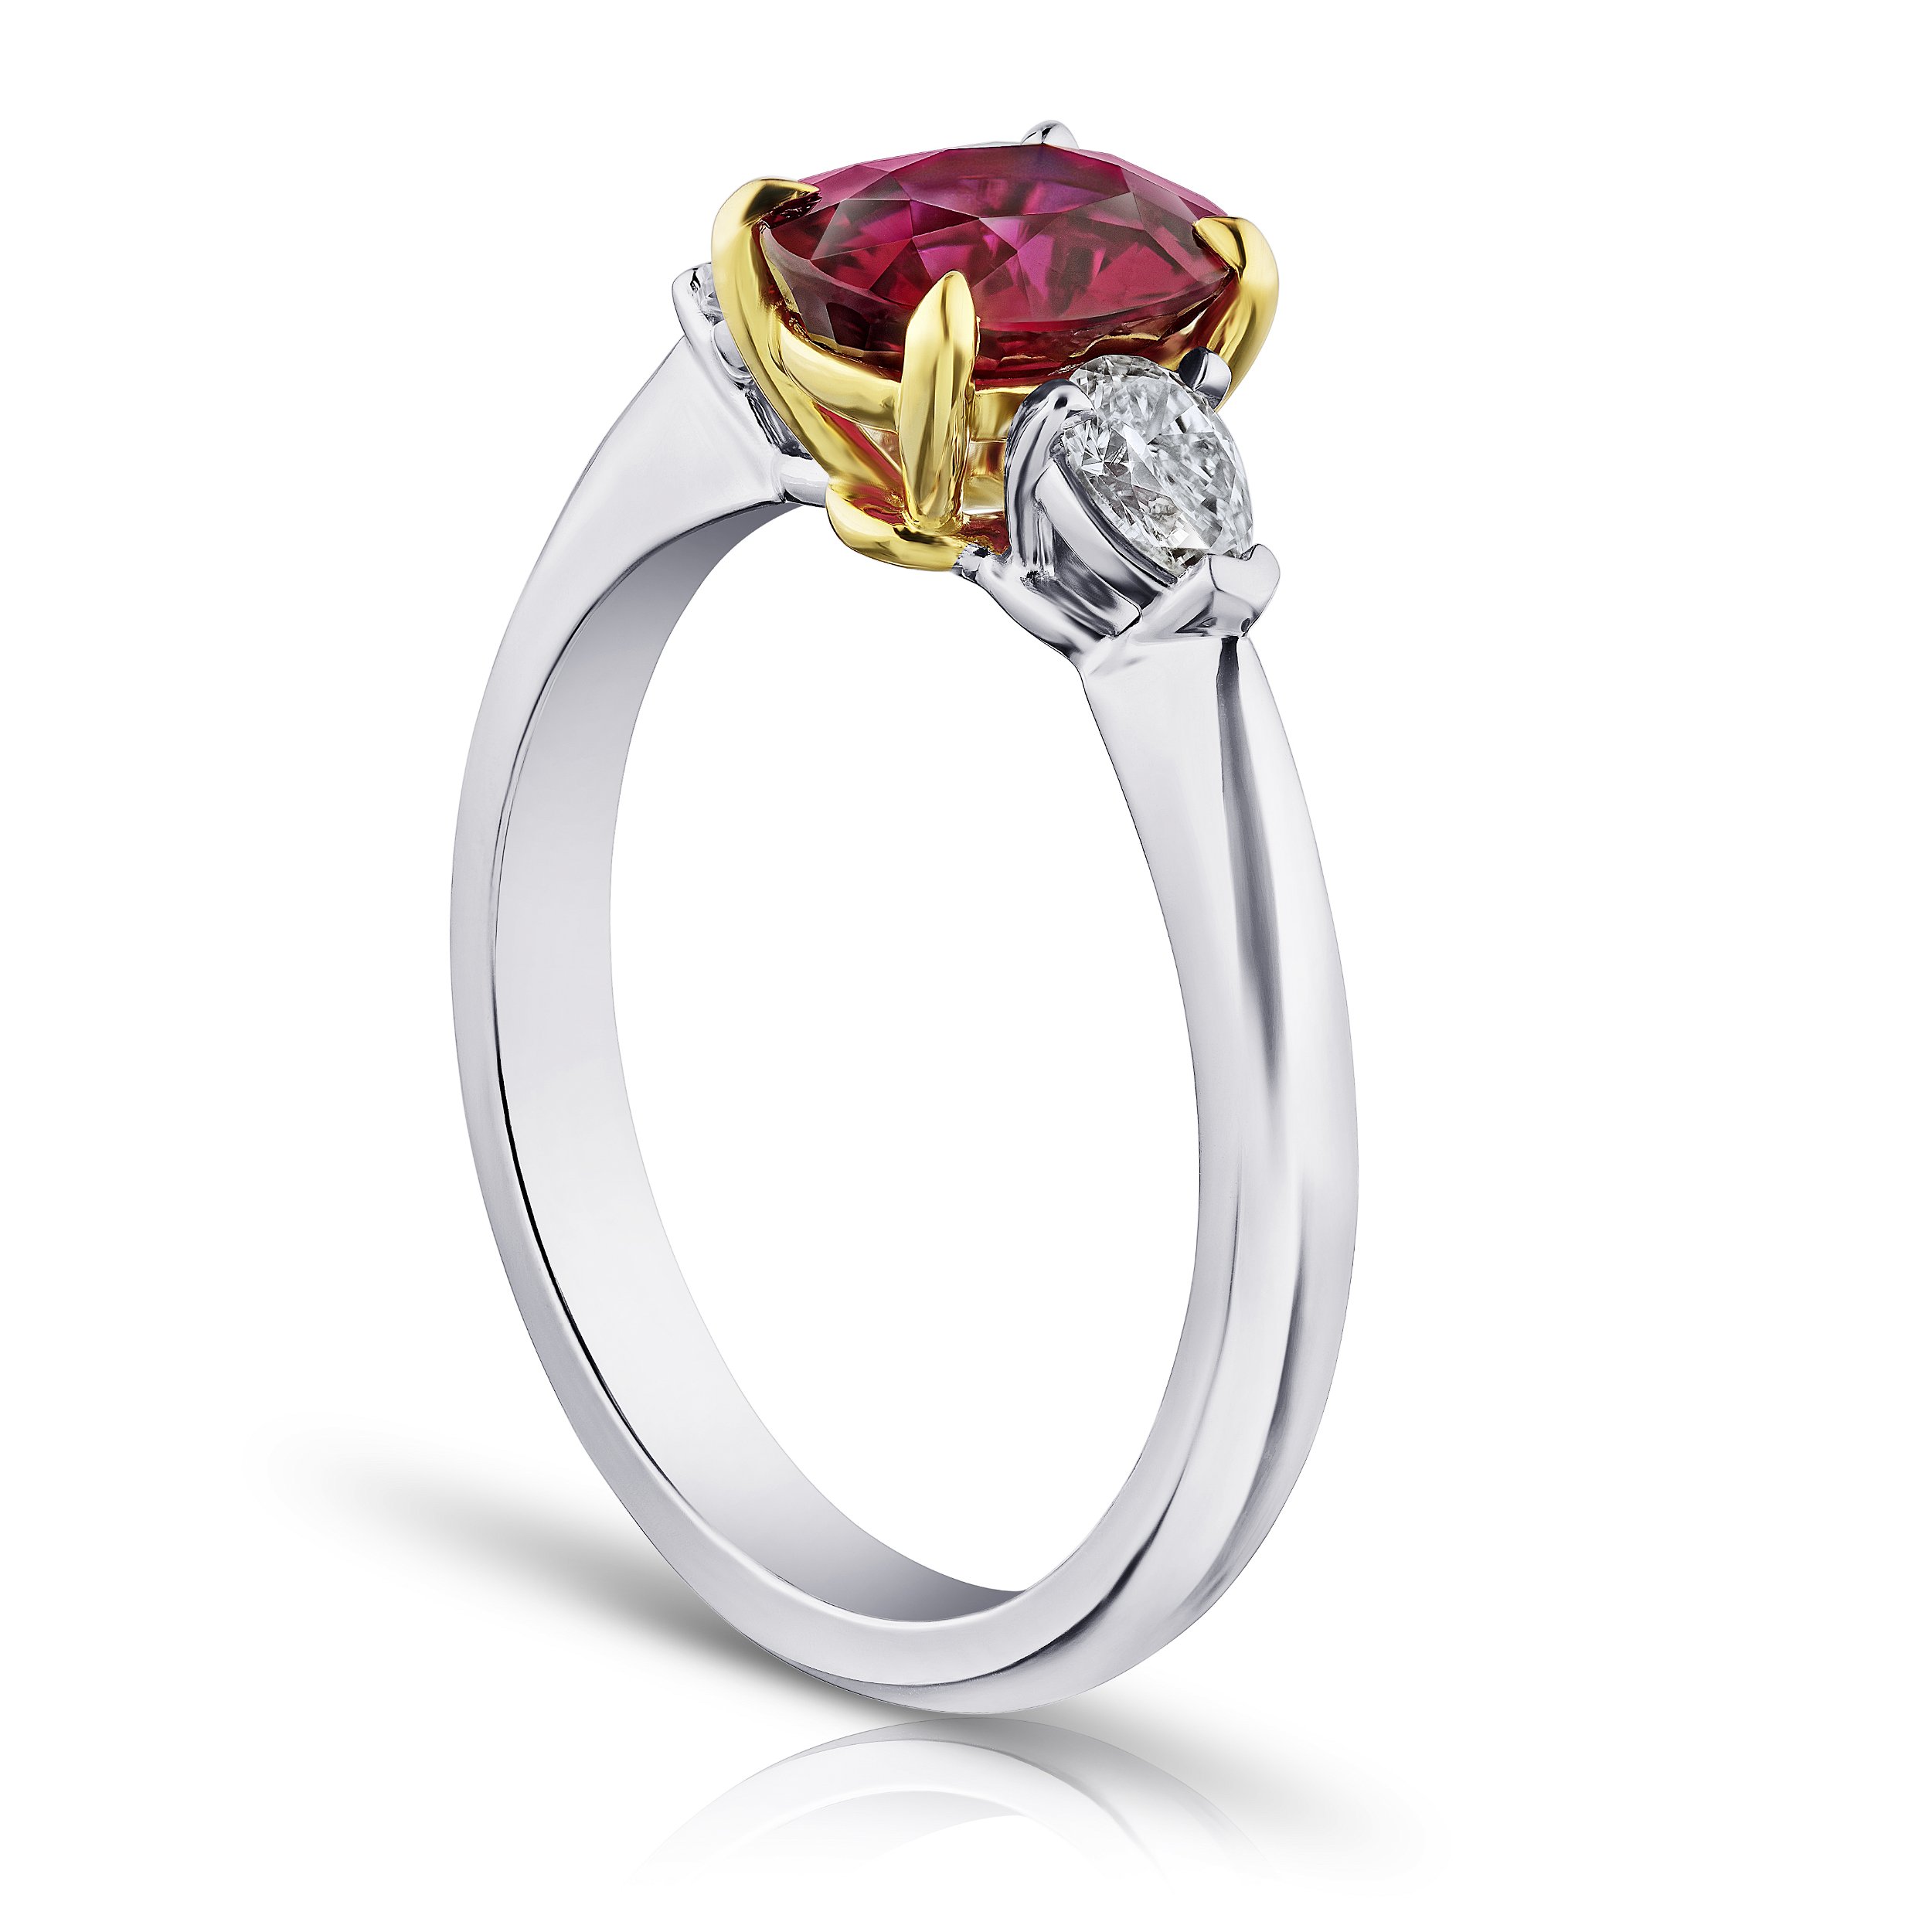 1.72 Carat Oval Red Ruby and Diamond Ring in Platinum and 18kt Yellow Gold